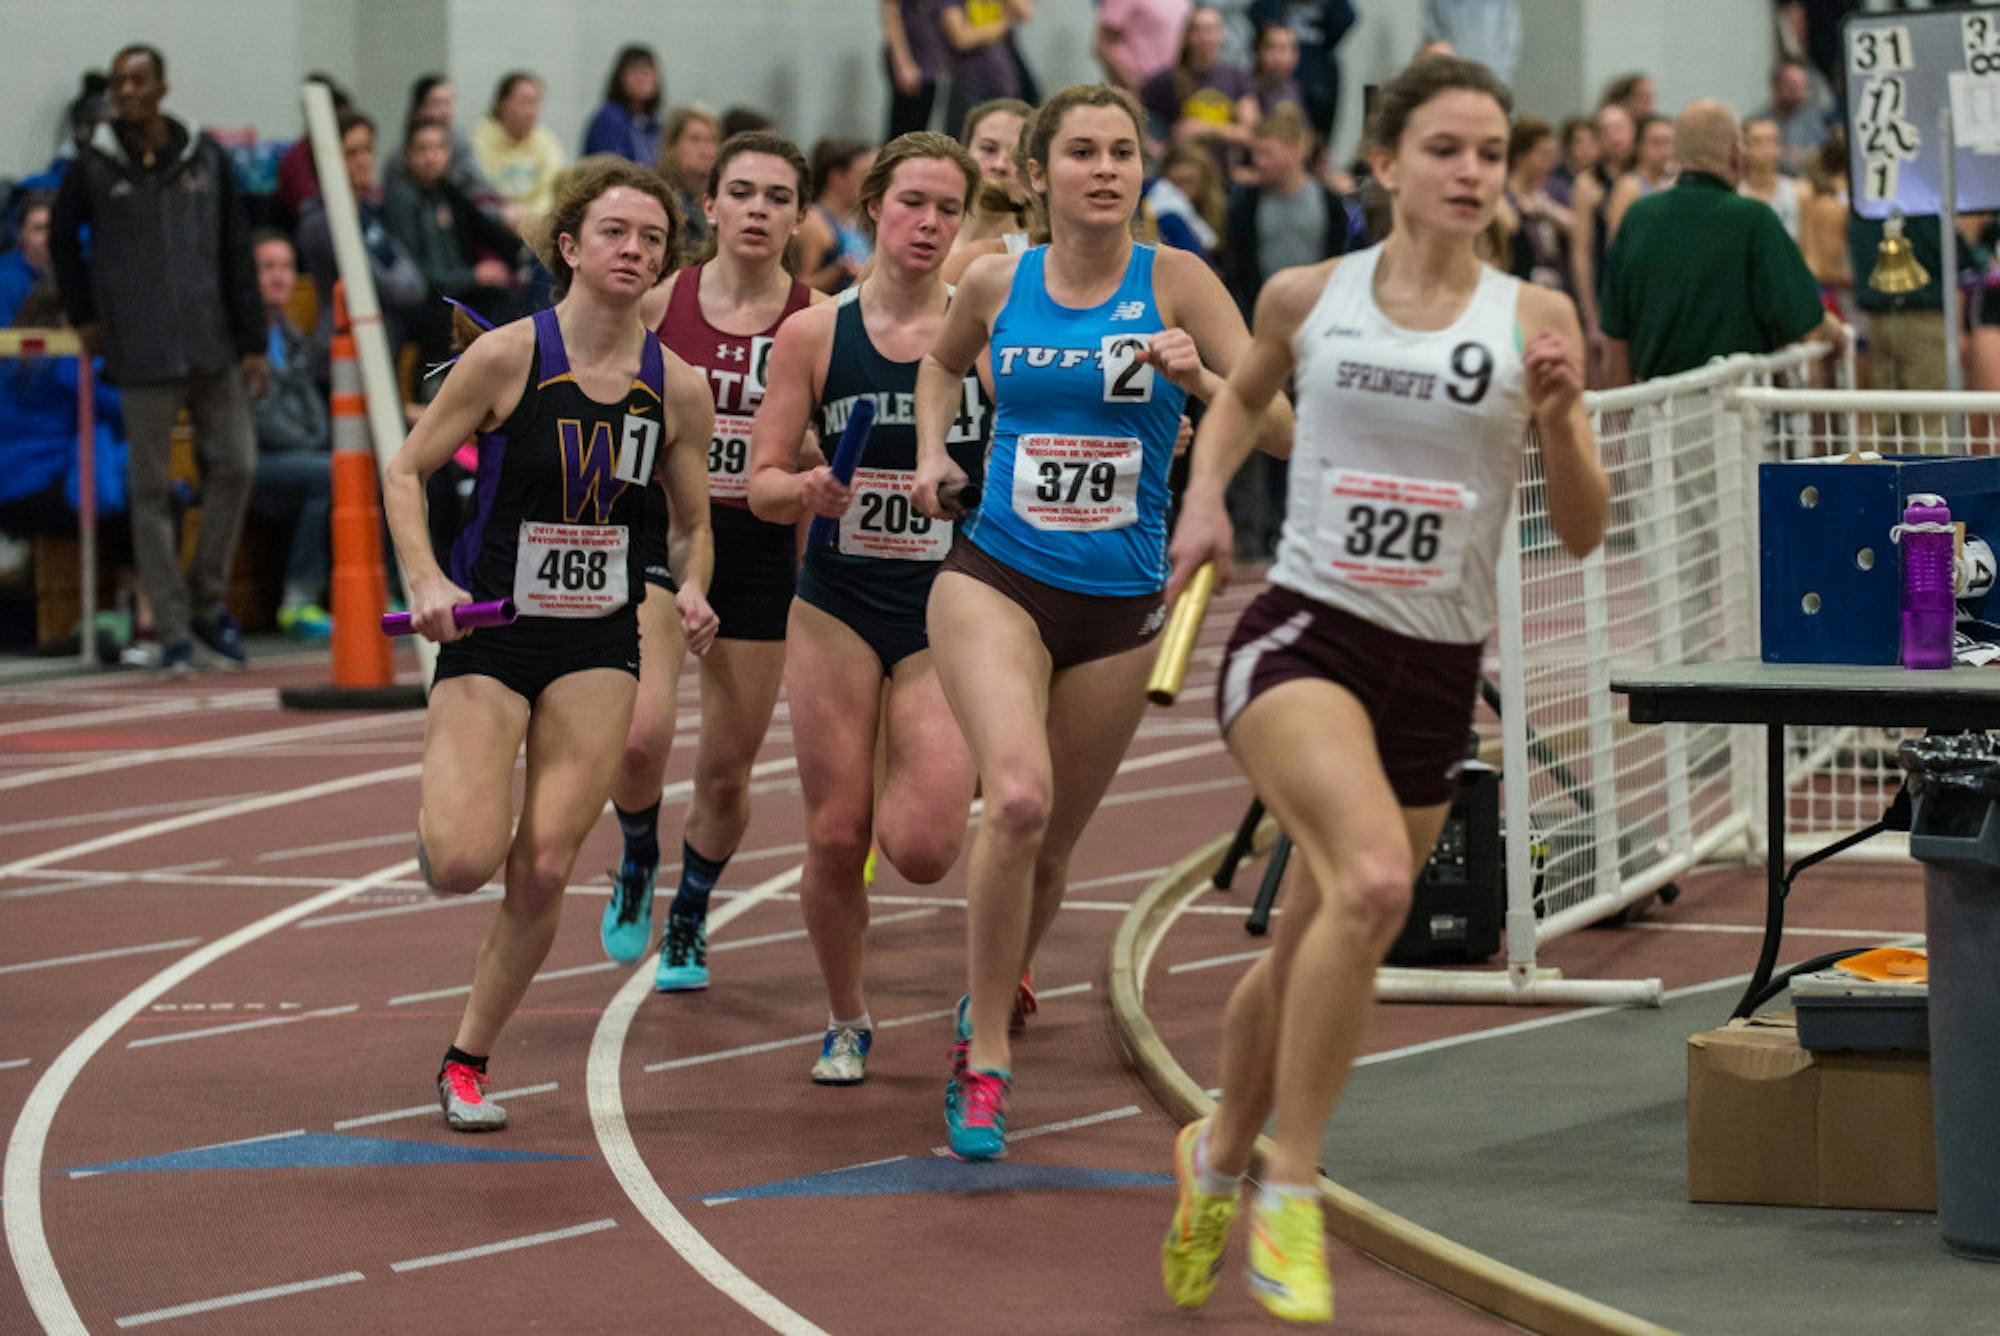 2017-02-18-Womens-Track-and-Field-at-MIT-019